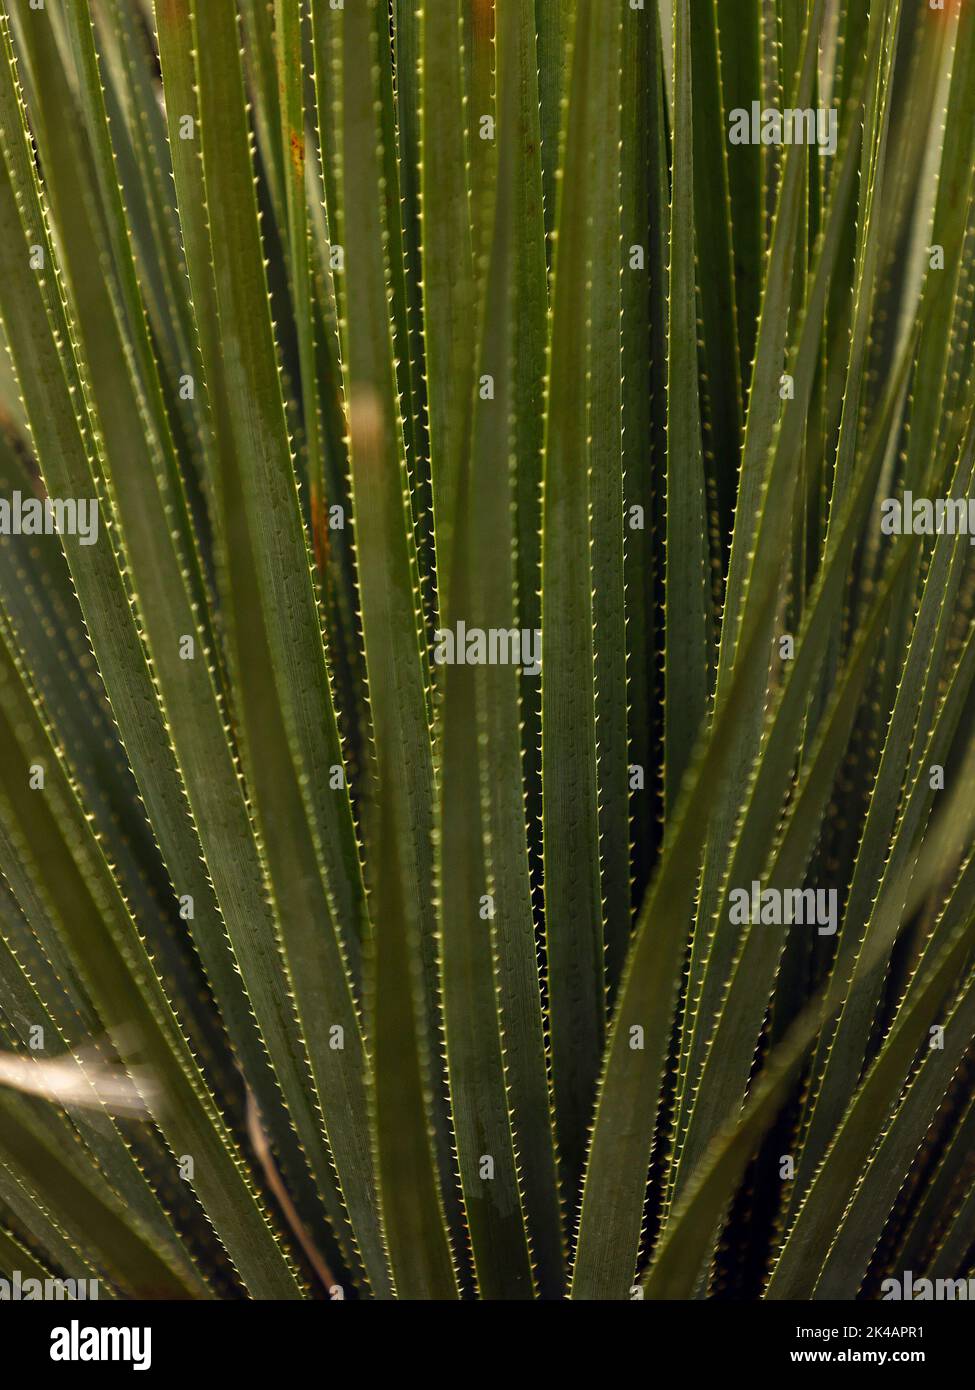 Close up of the upright green stiff leaves with hooked spines of the succulent Dasylirion acrotrichum or Green Desert Spoon seen in the UK. Stock Photo